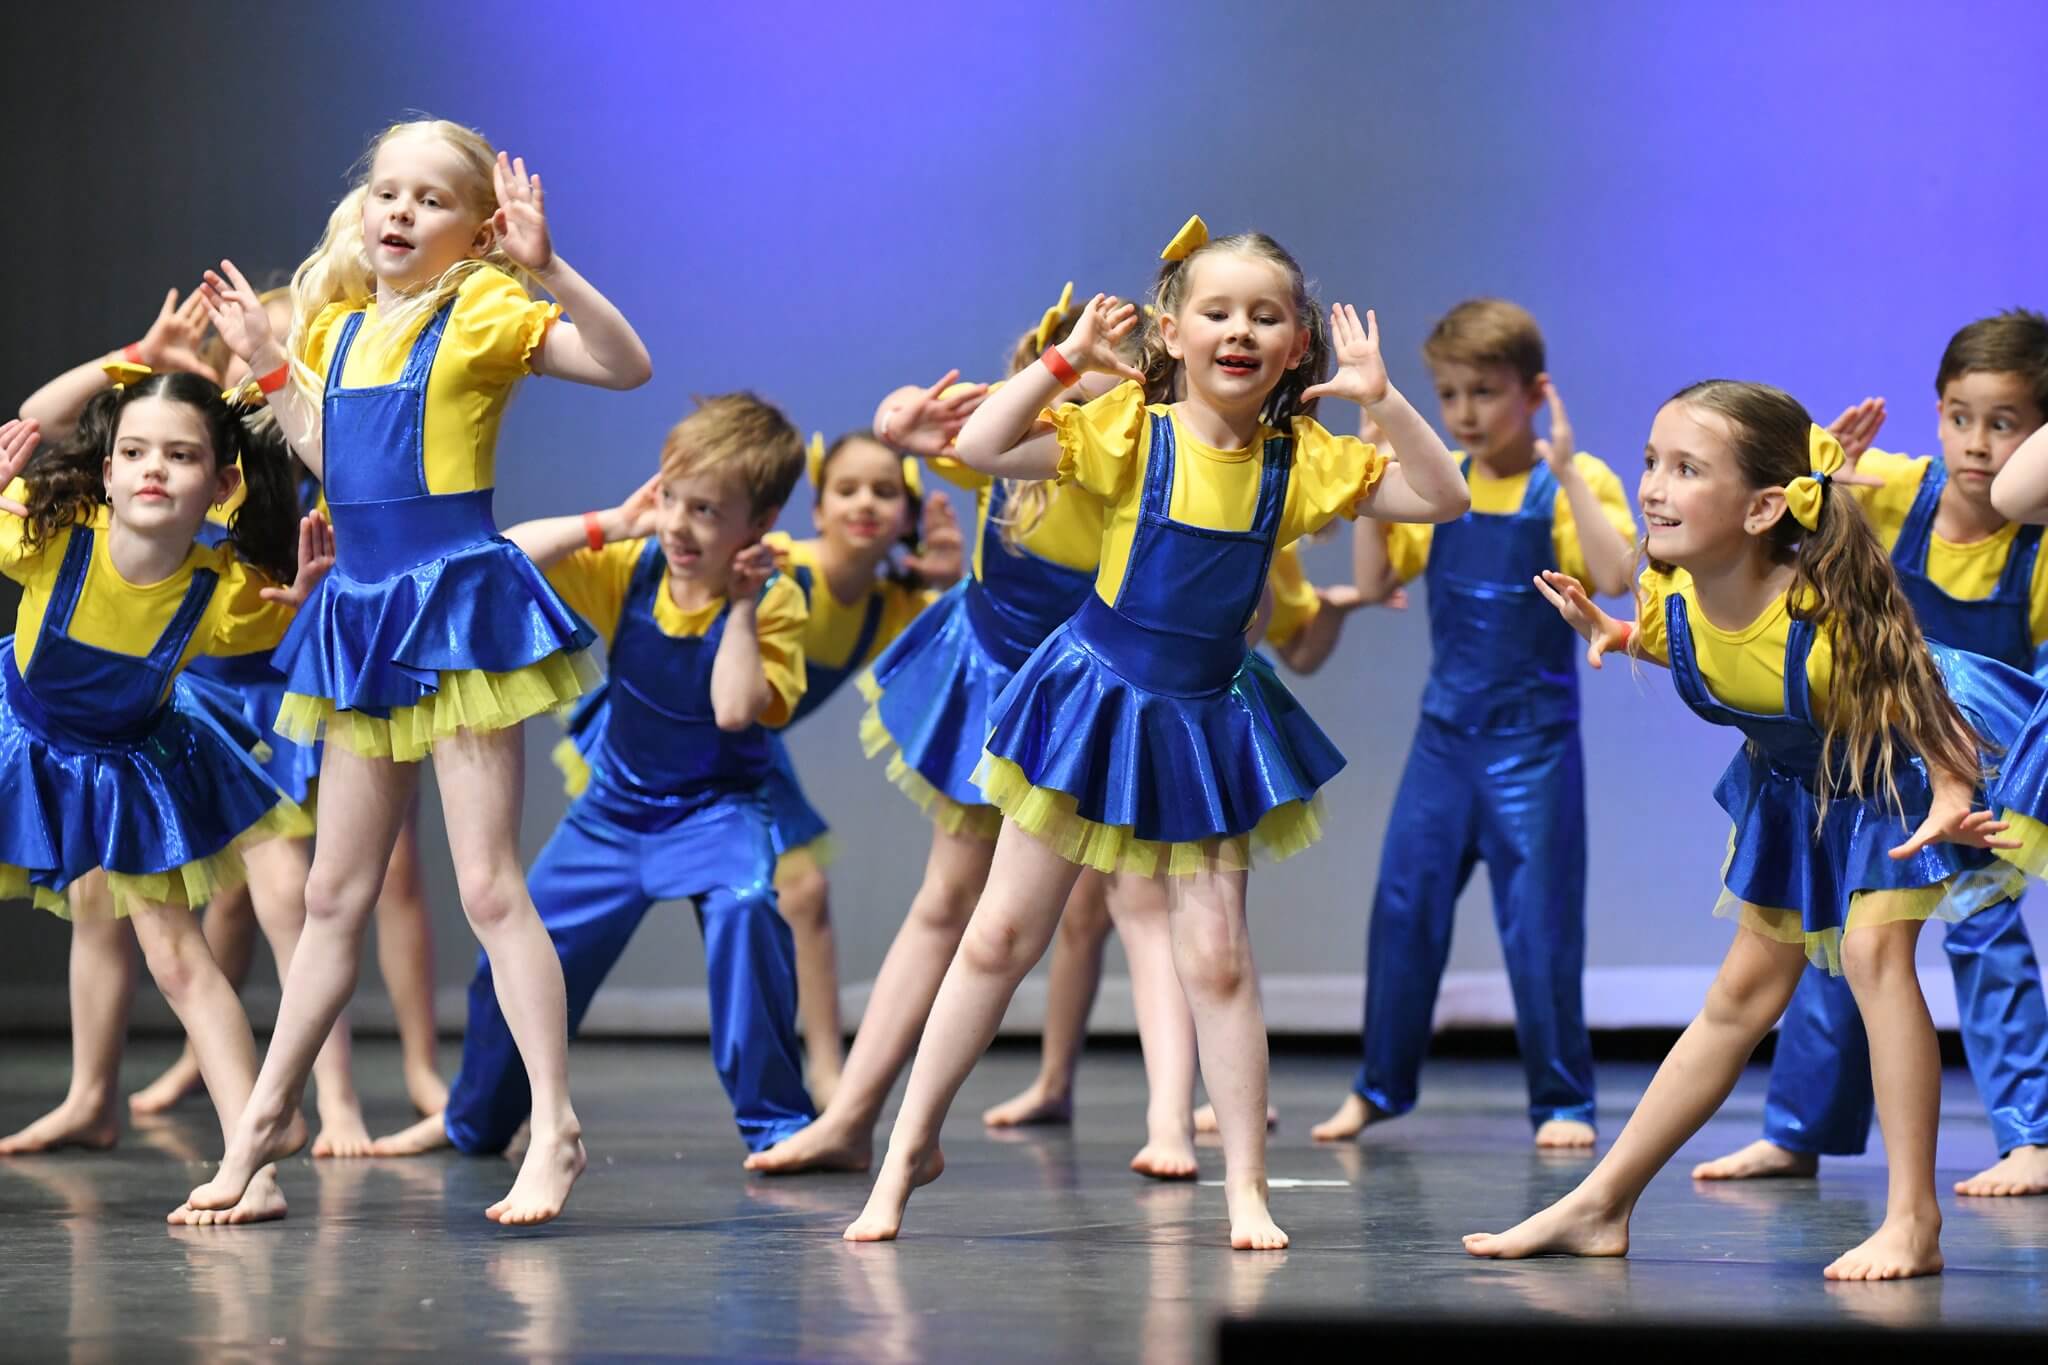 Student performing a Bob the Builder themed dance at Iron Cove Performing Arts Festival